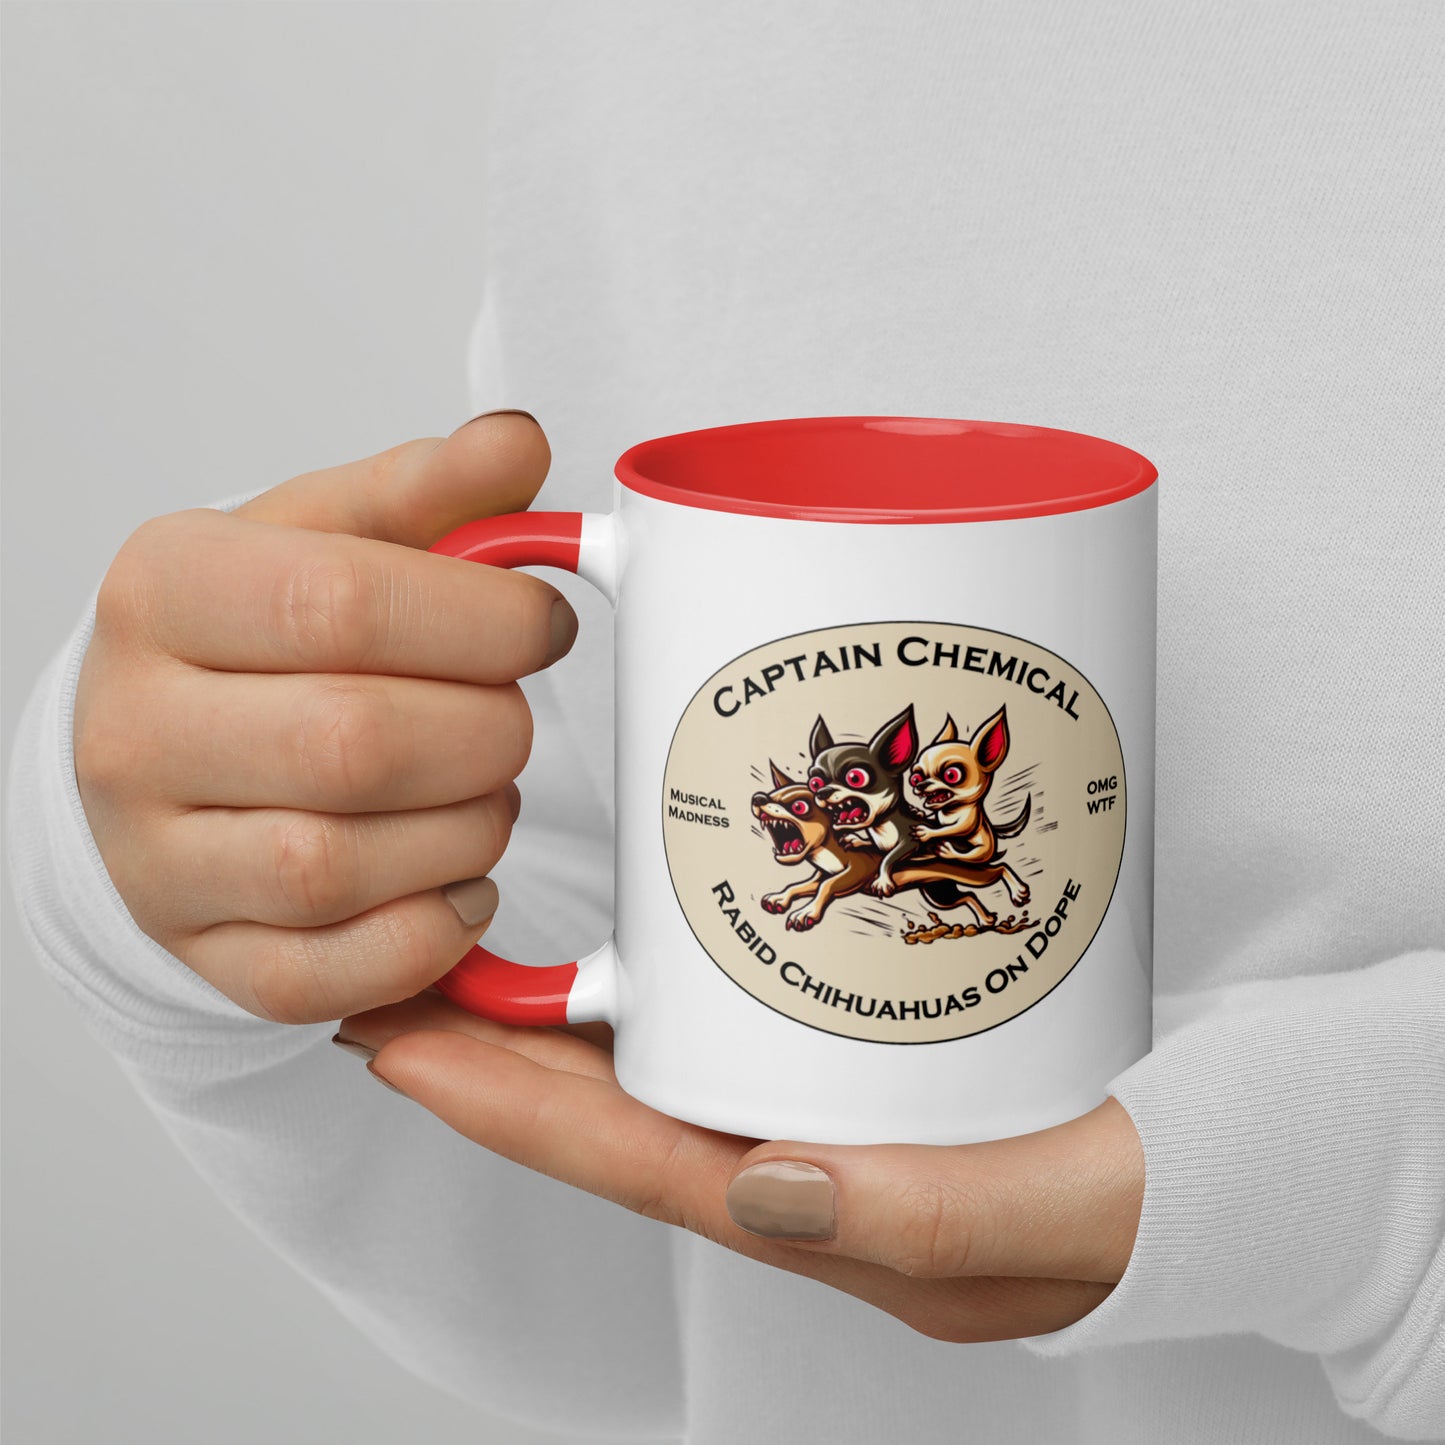 Captain Chemical Chihuahuas Mug With Color Inside